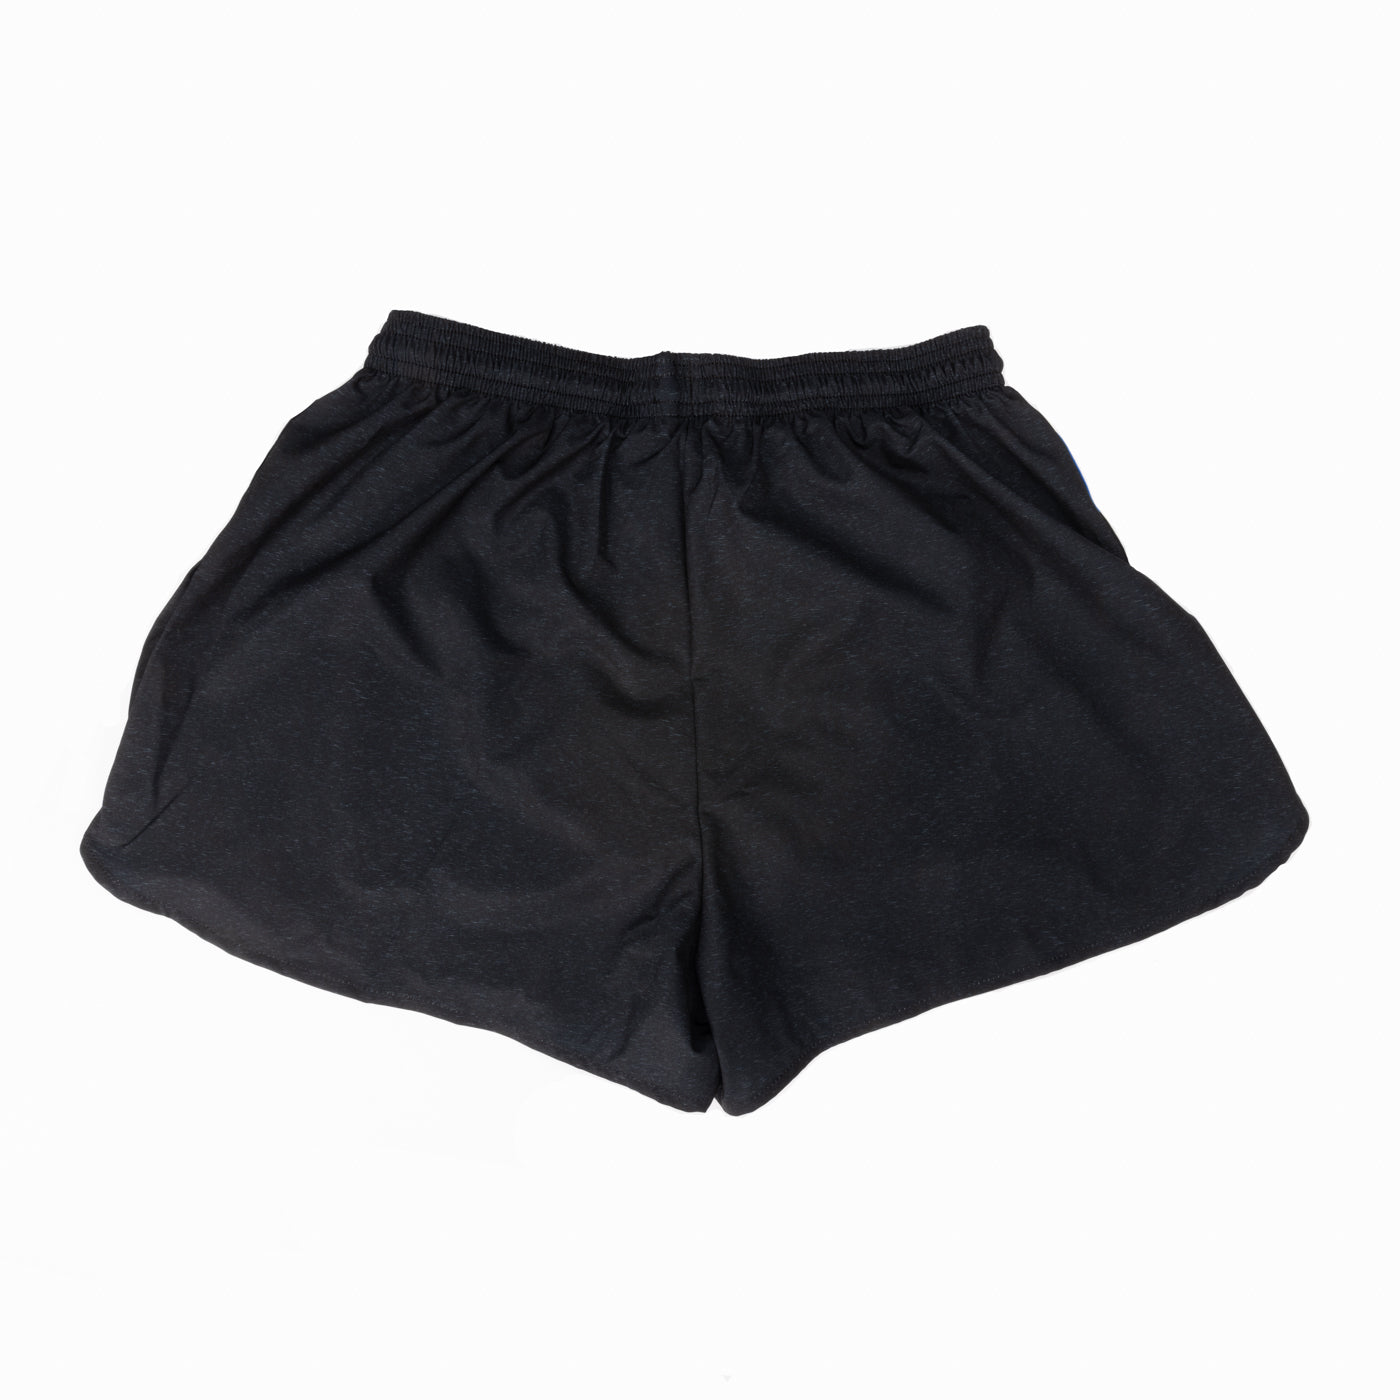 All Day x BOA Collab - Men's Shorts